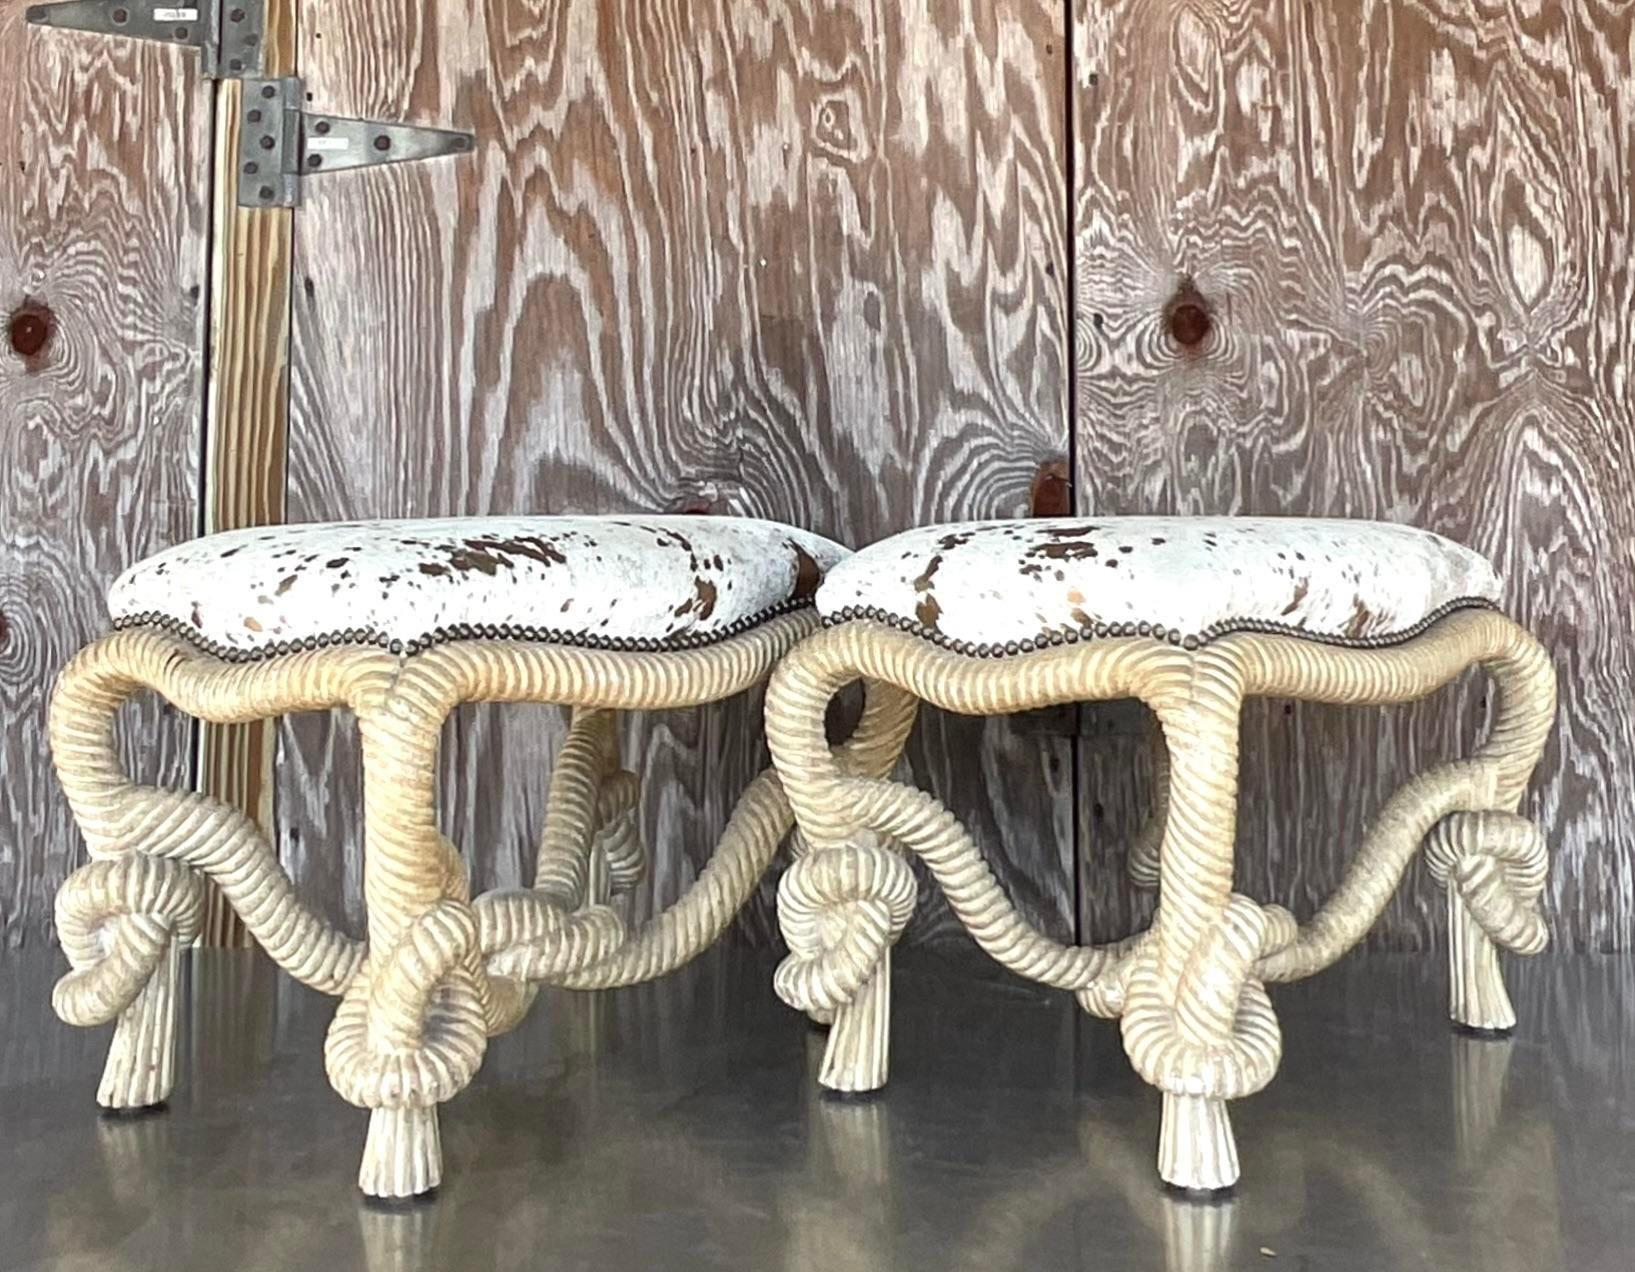 An extraordinary pair of vintage Regency low stools. The coveted rope and knot design with beautiful hand carved detail. A chic metallic leather hide upholstery. Acquired from a Palm Beach estate.